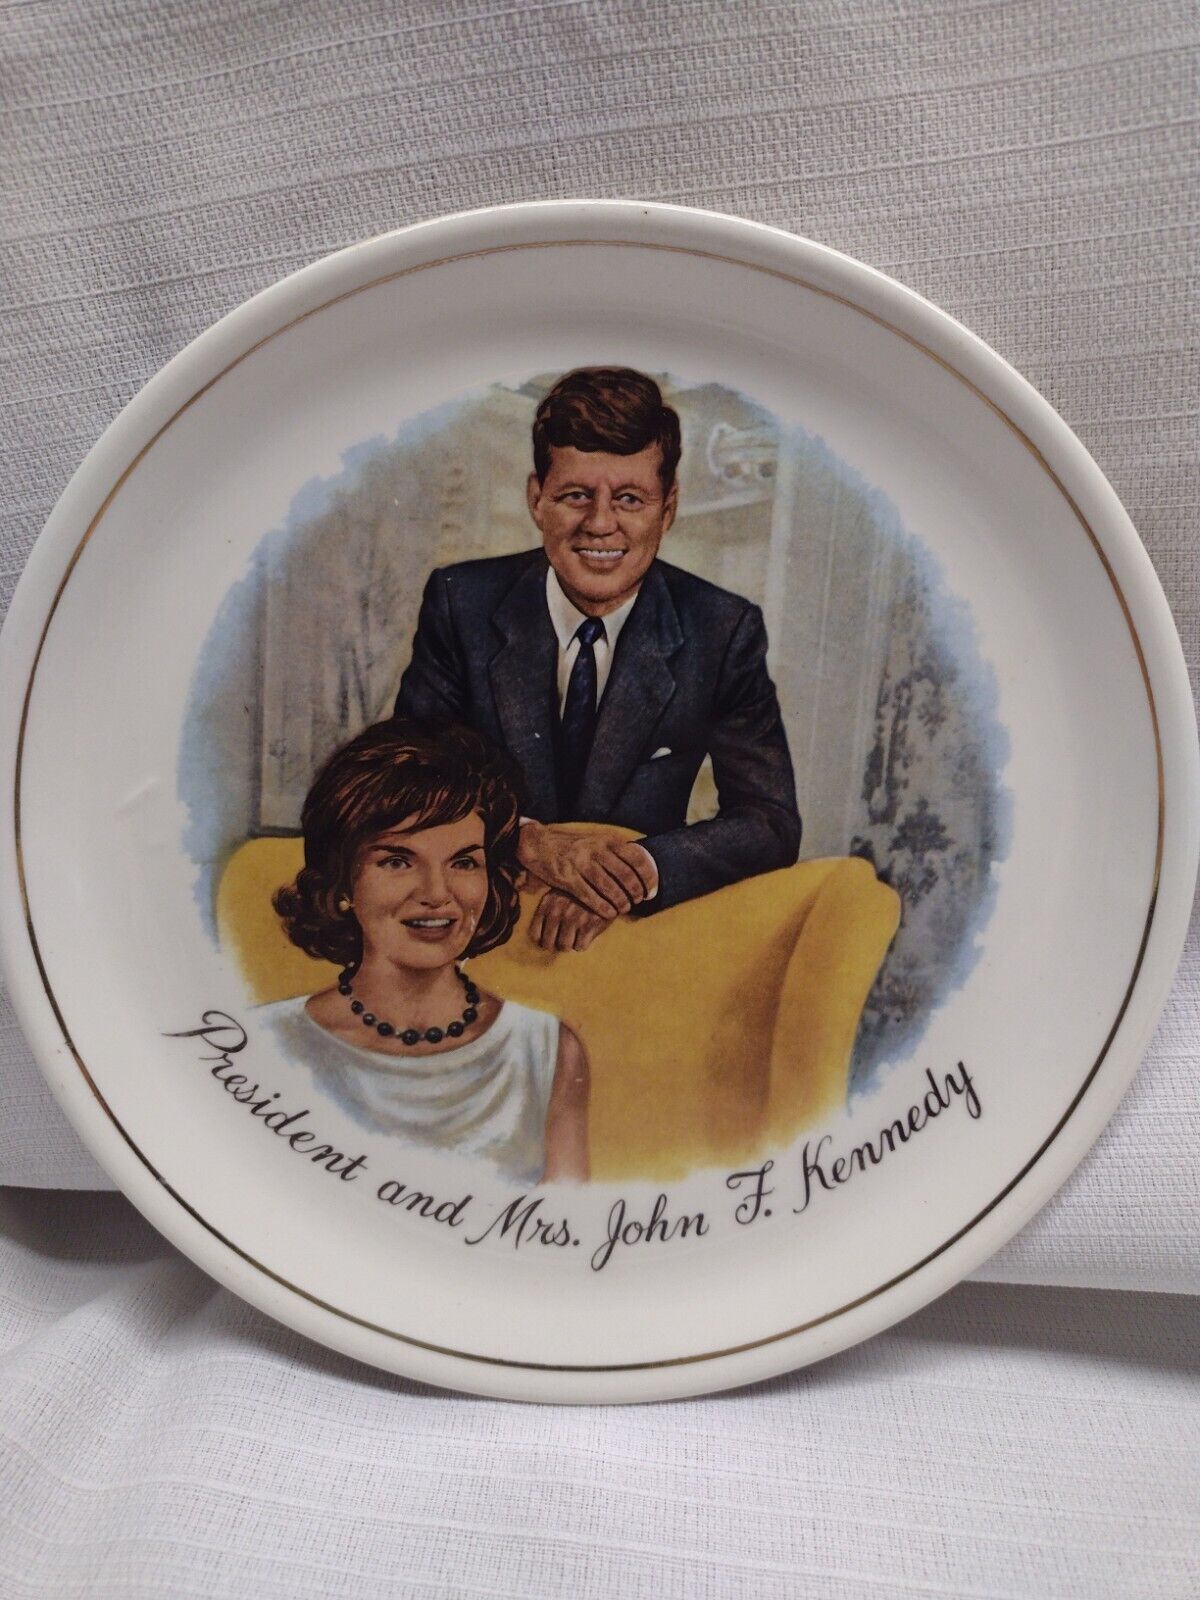 Vintage President and Mrs. John F. Kennedy decorative plate 1960s 